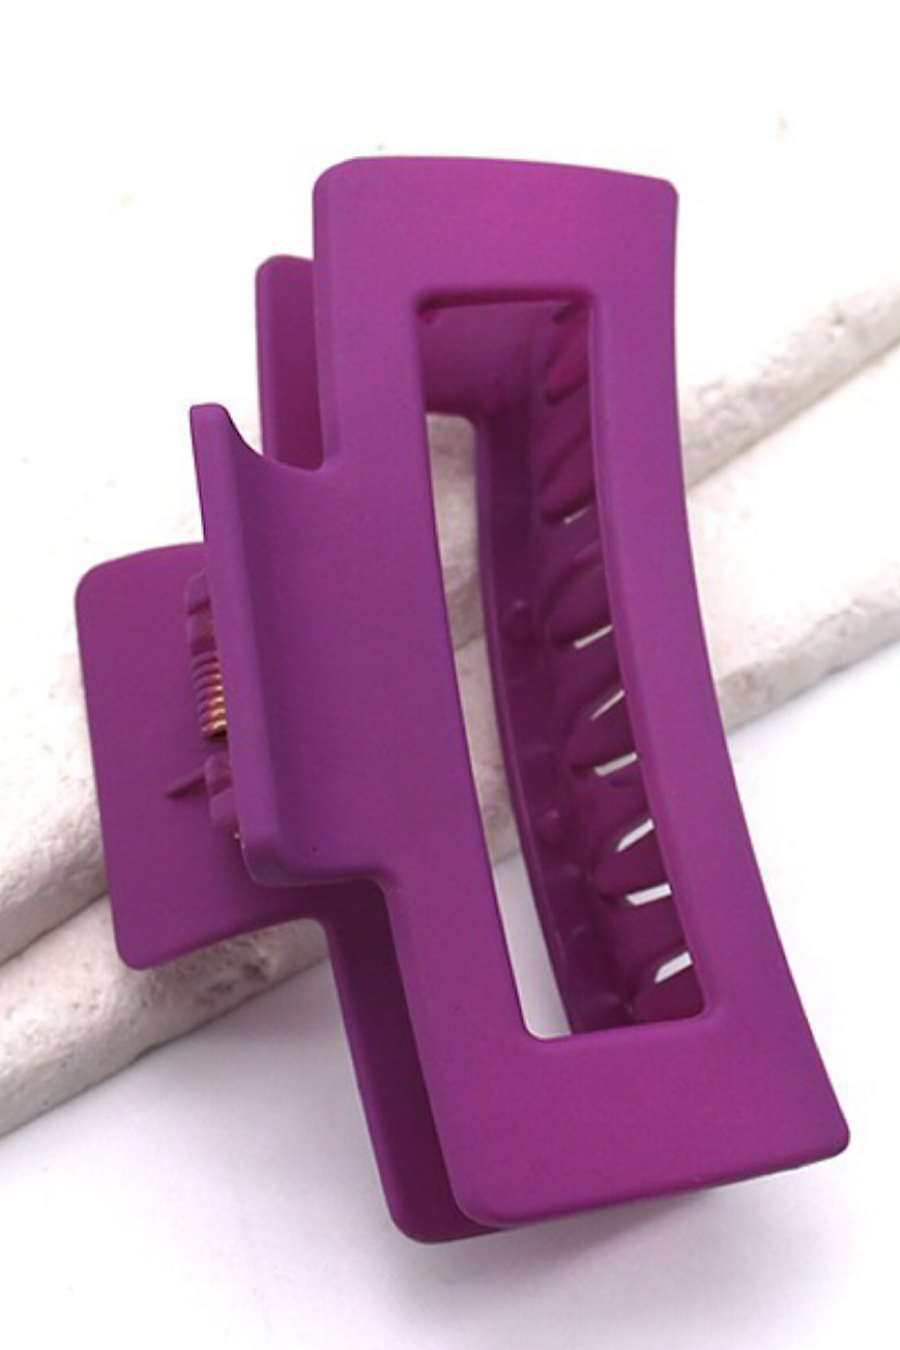 Hair Claw Clips in Several Colors